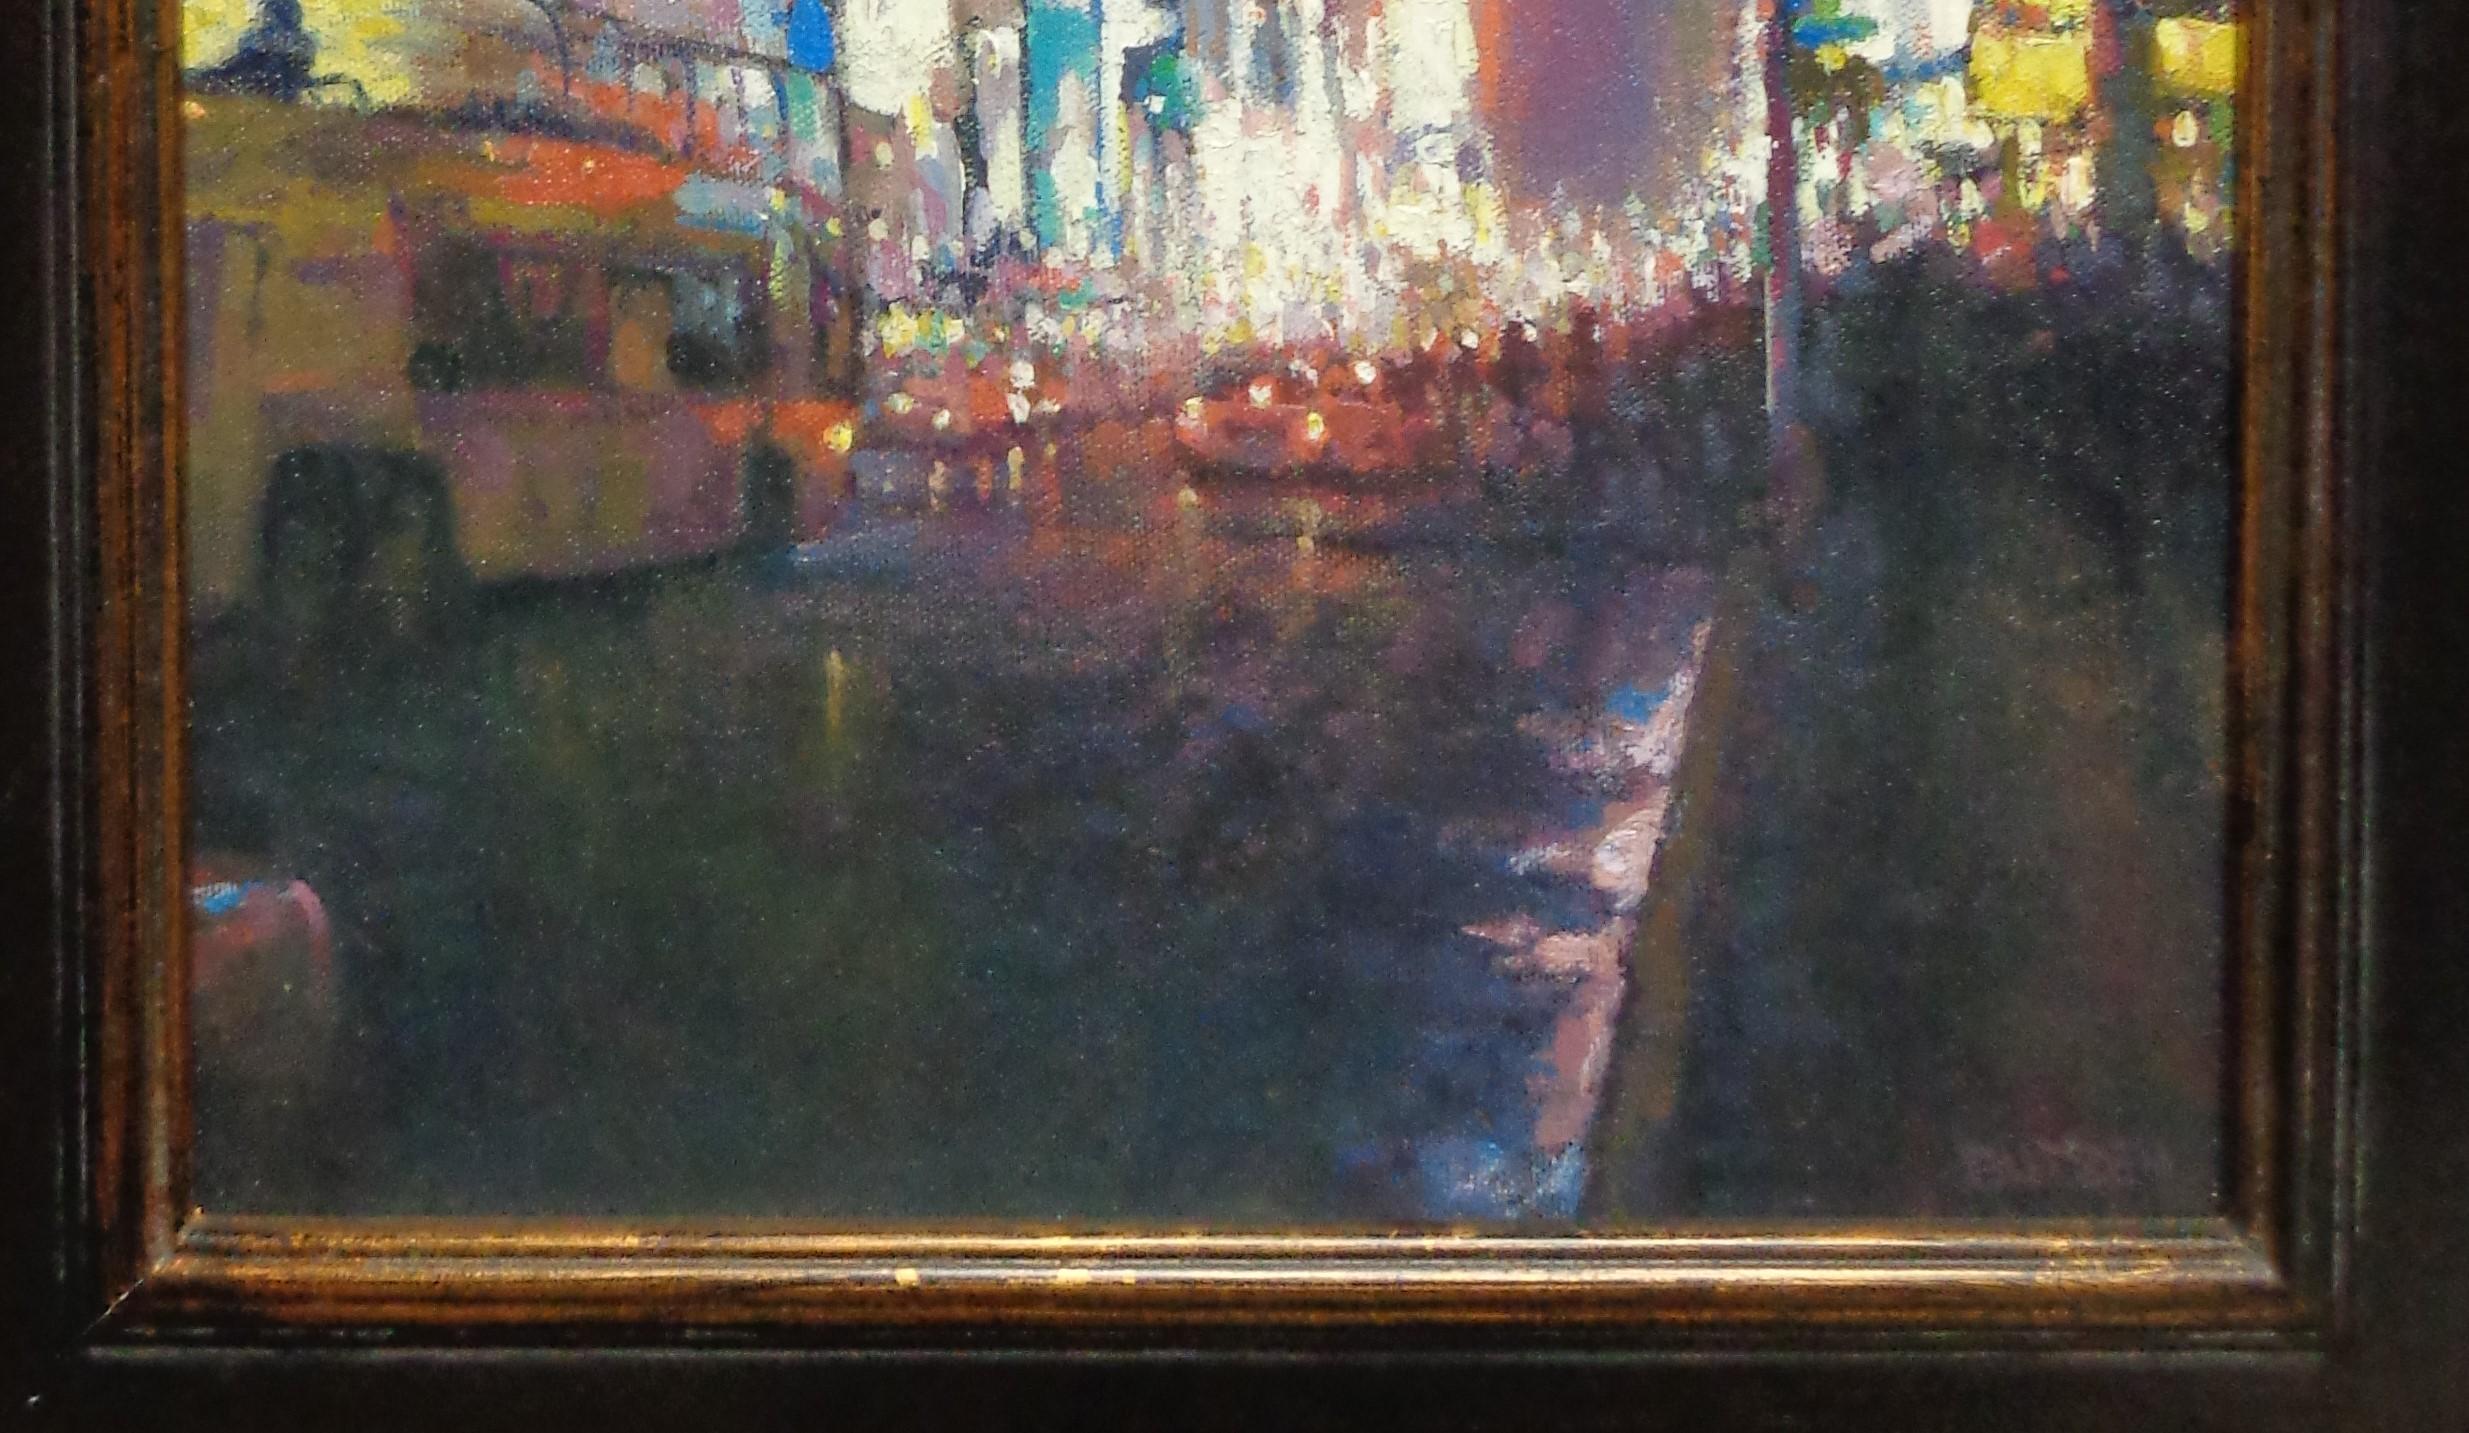  New York City Nocturne Oil Painting Michael Budden Times Square For Sale 3